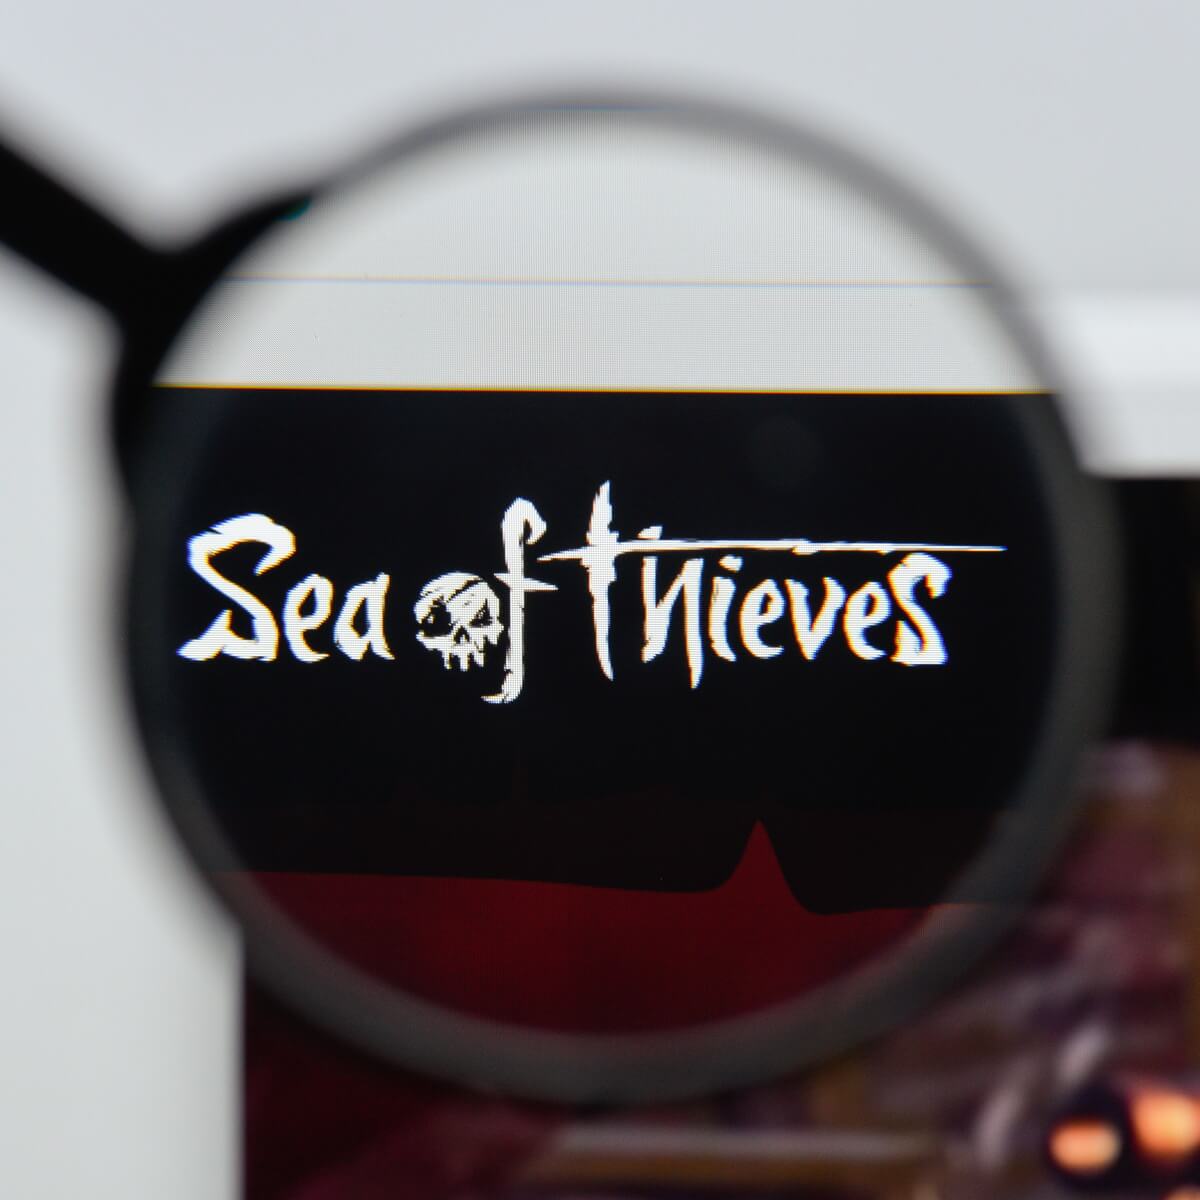 fix sea of thieves won't download